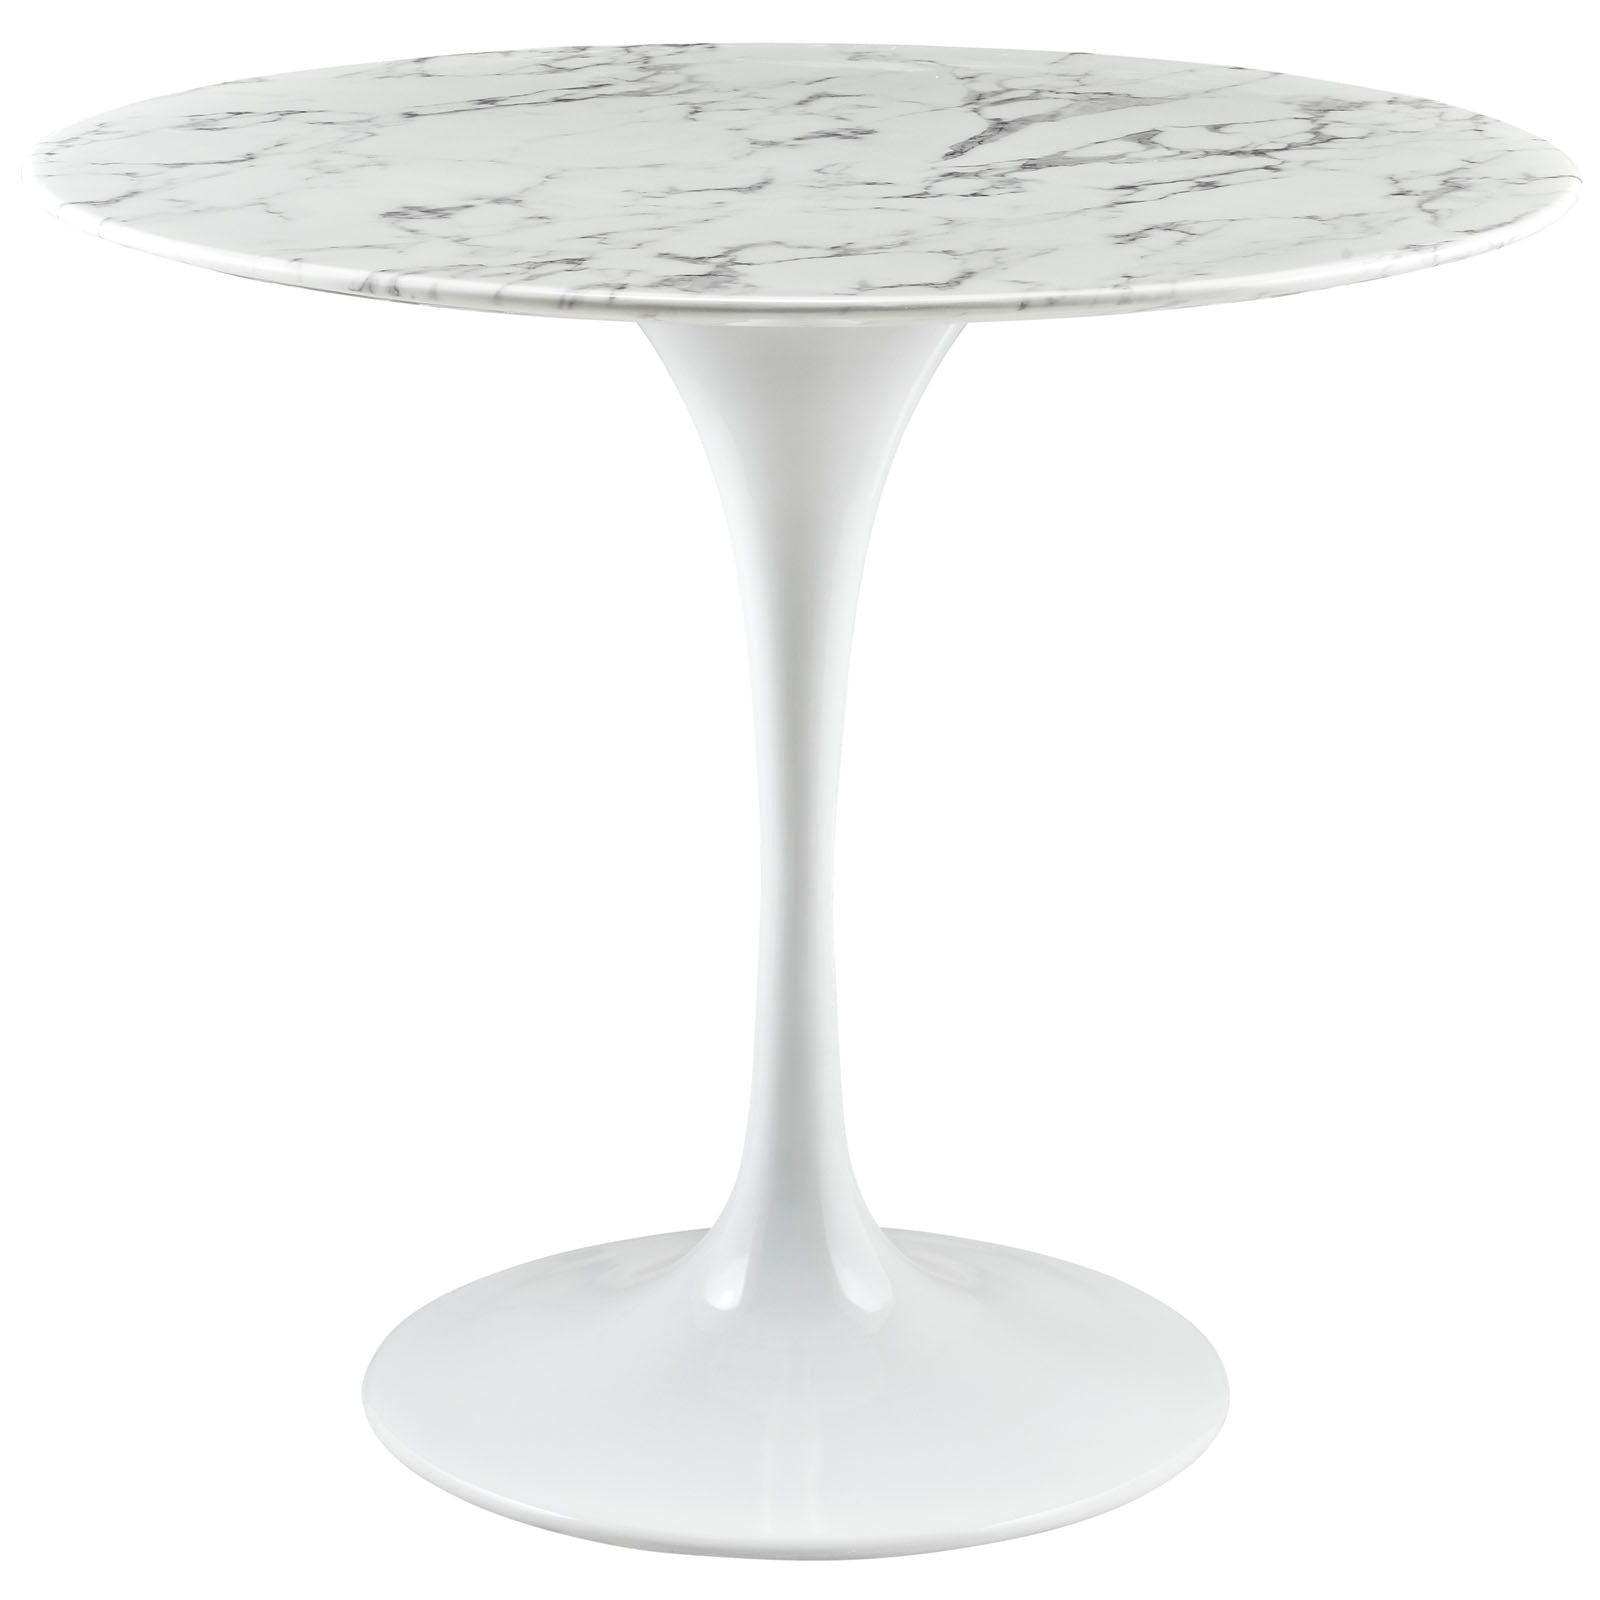 Lippa 36" Round Artifical Marble Dining Room Table Set - Modern Dining Table Set